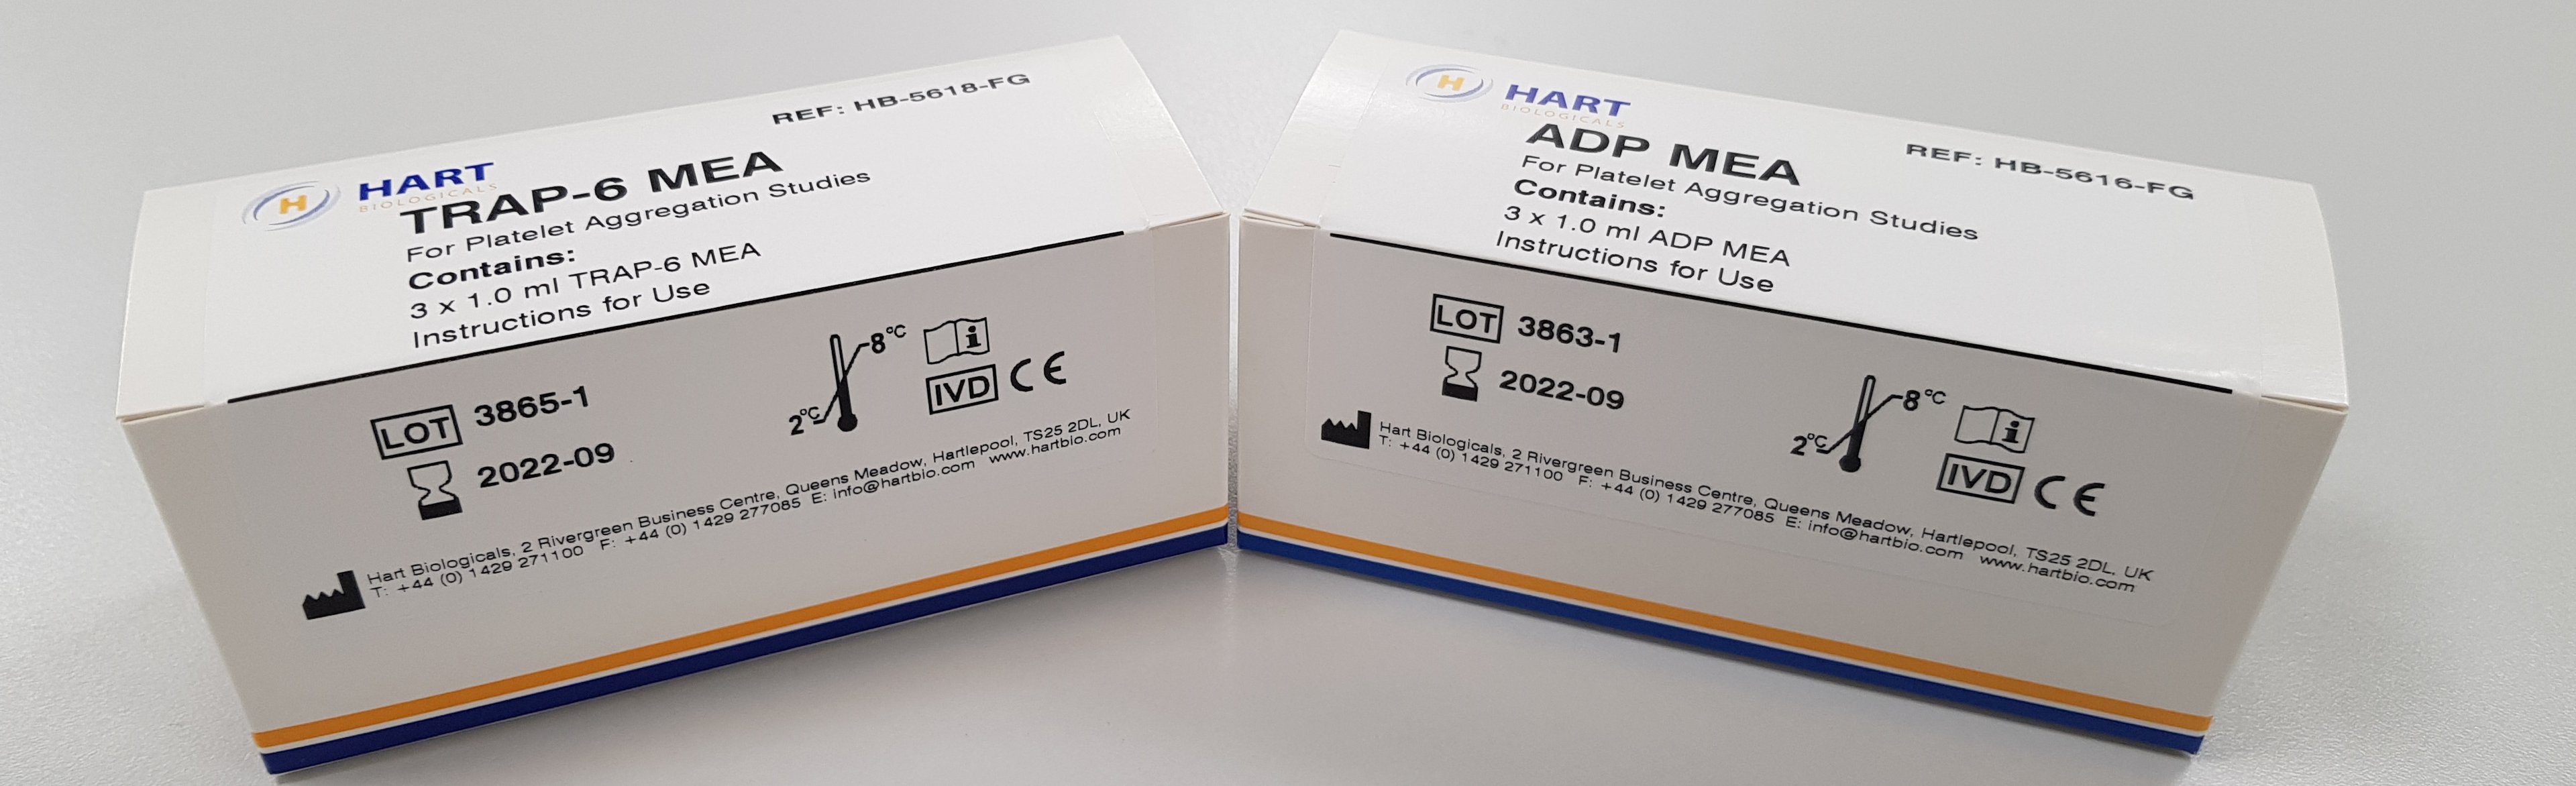 Hart Bio launches ADP MEA and TRAP-6 MEA  Image